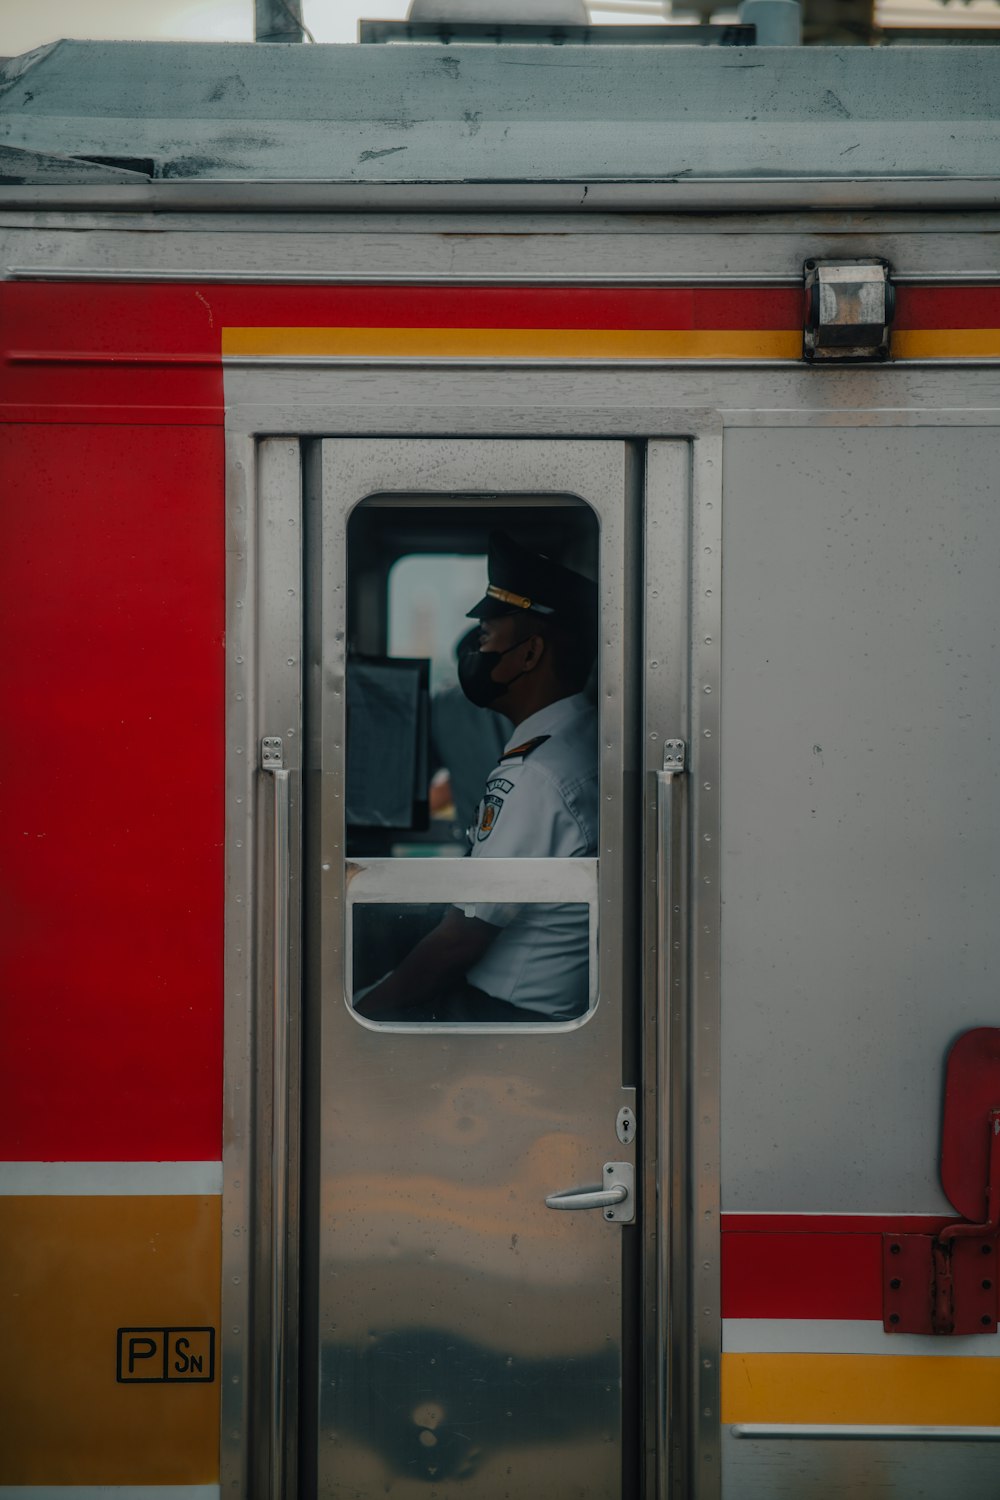 a person in a hat looks out a train window